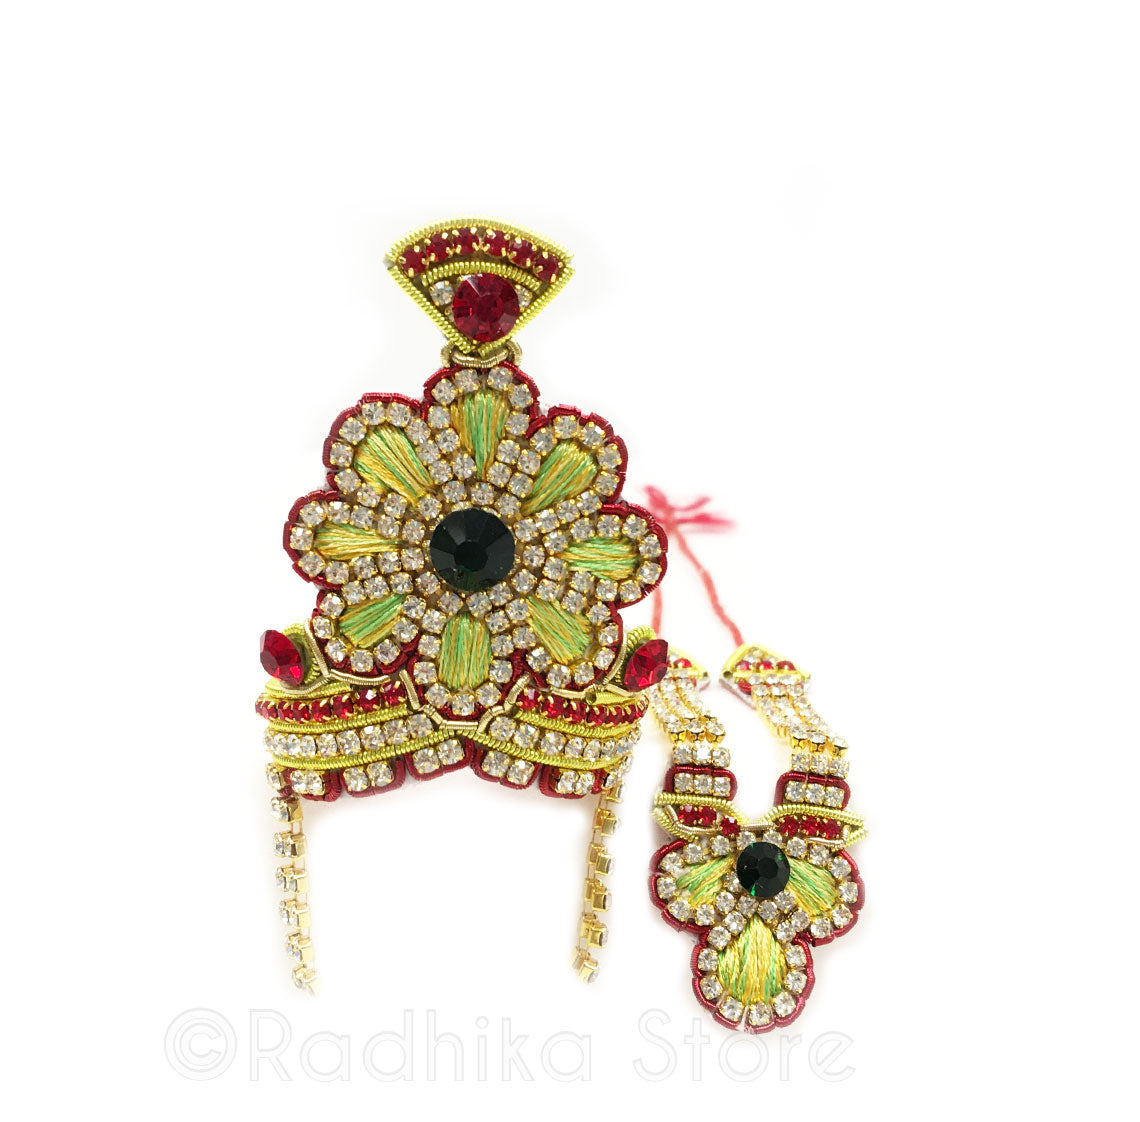 Vrindavan Flower - Deity Crown and Necklace Set- Lemon/Lime and Red Colors